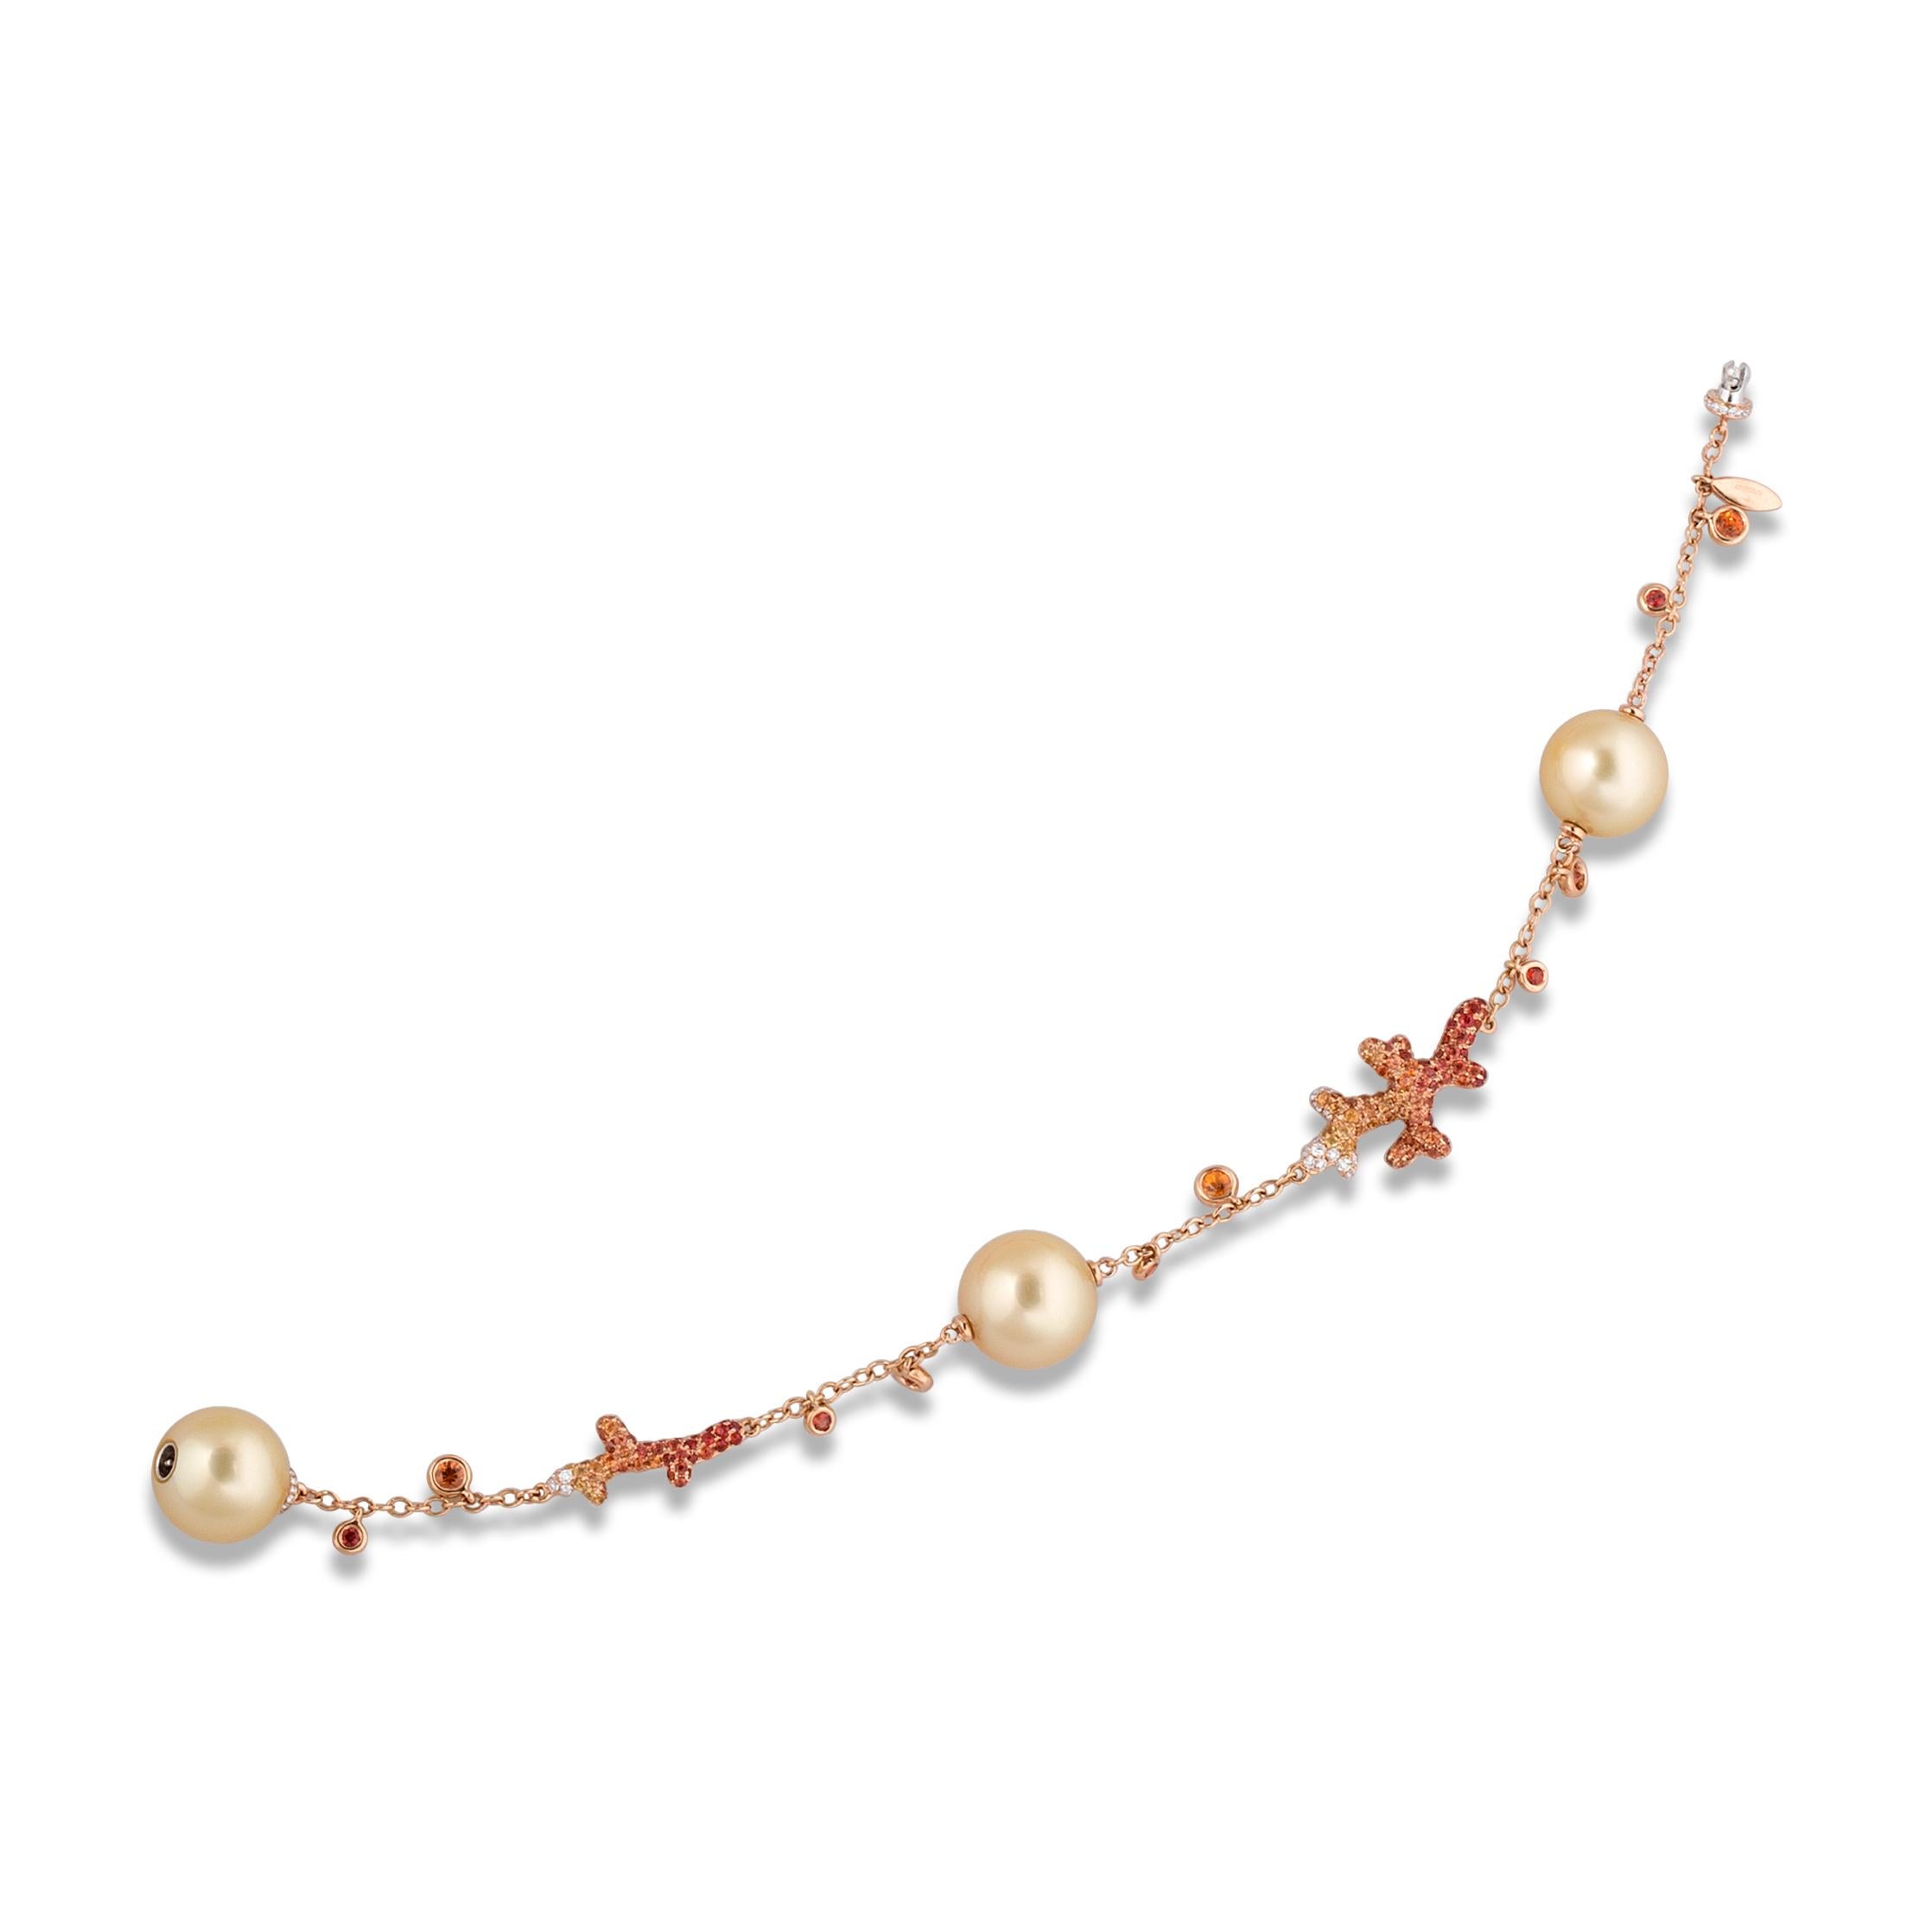 White Diamonds 0.17 cts - Yellow and Orange Sapphires 1.69 cts - Gold South Sea Pearls 3 pieces 11.75mm Coral Reef Bracelet, from Thalassa Collection, features shaded colour gemstones encrusted in delicate coral branches.

The bracelet is matching